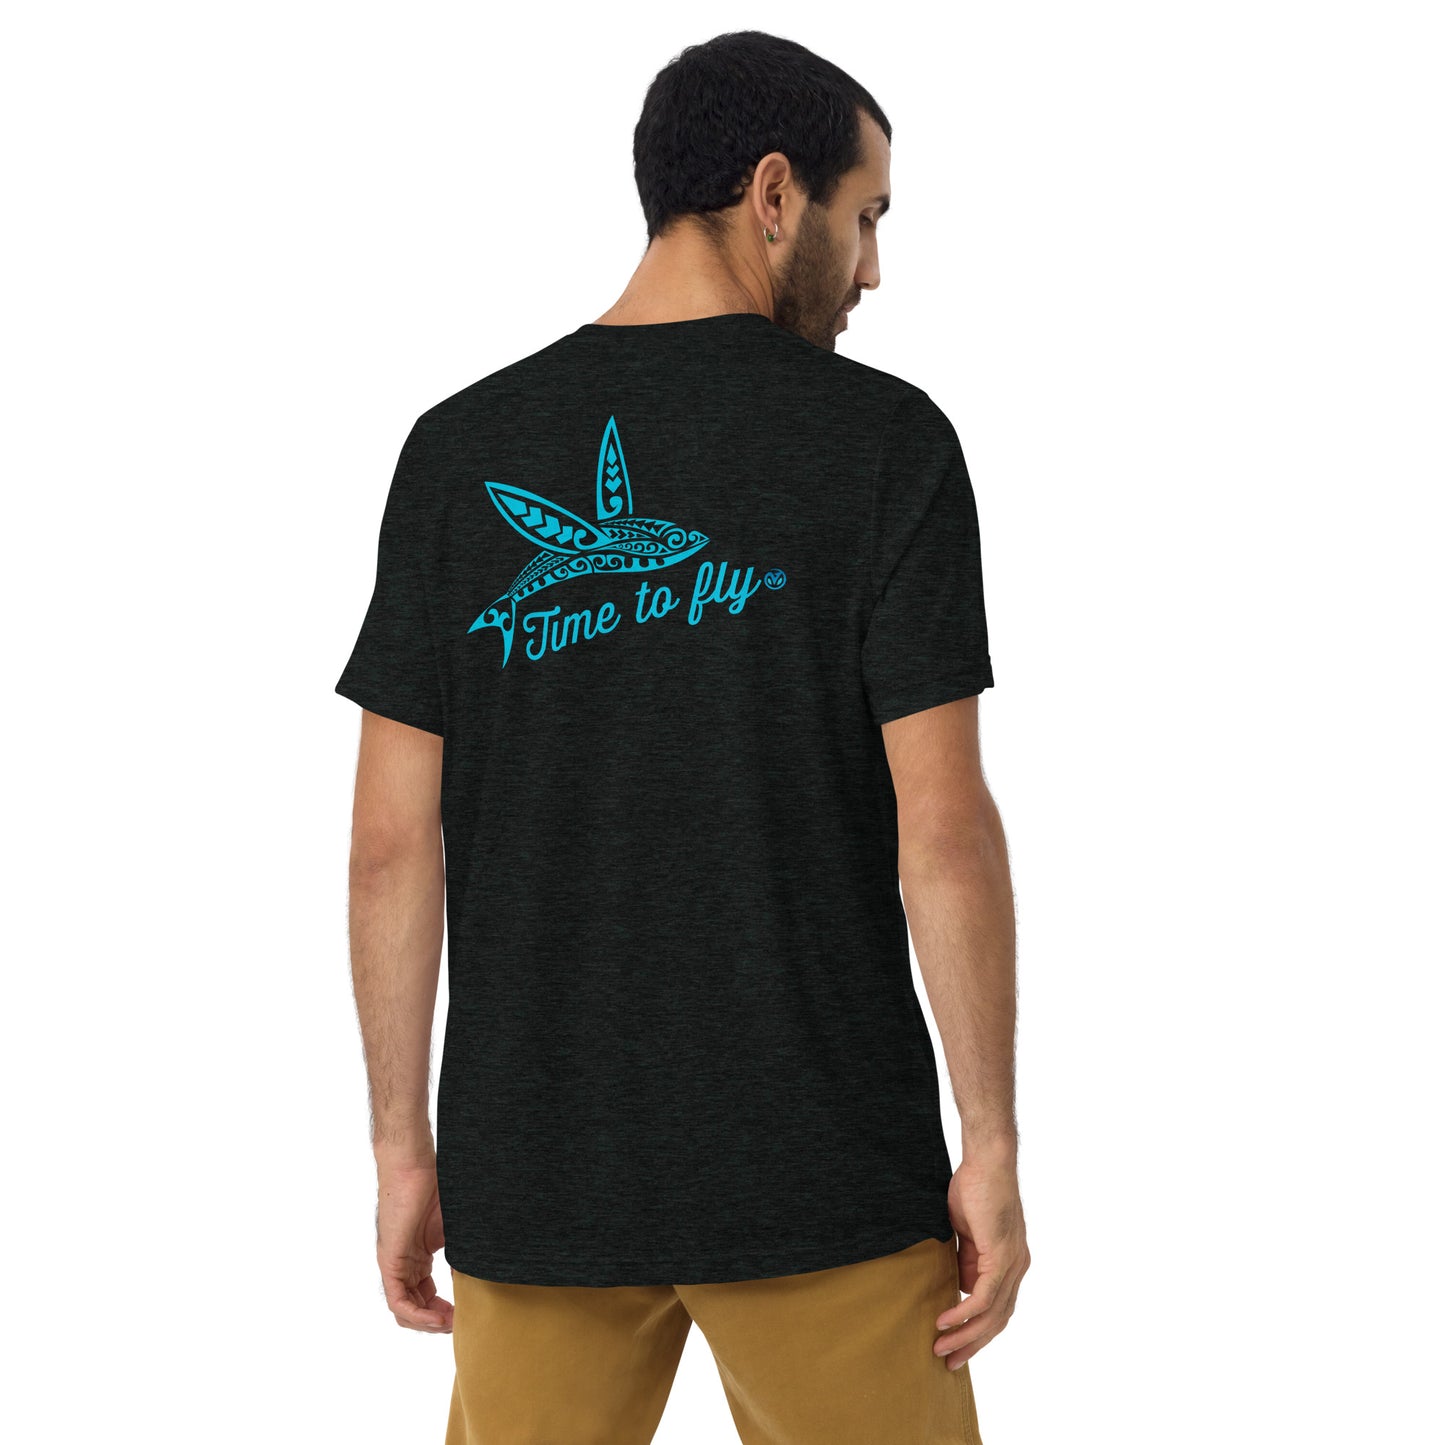 Time to fly (tri-blend, back side only)